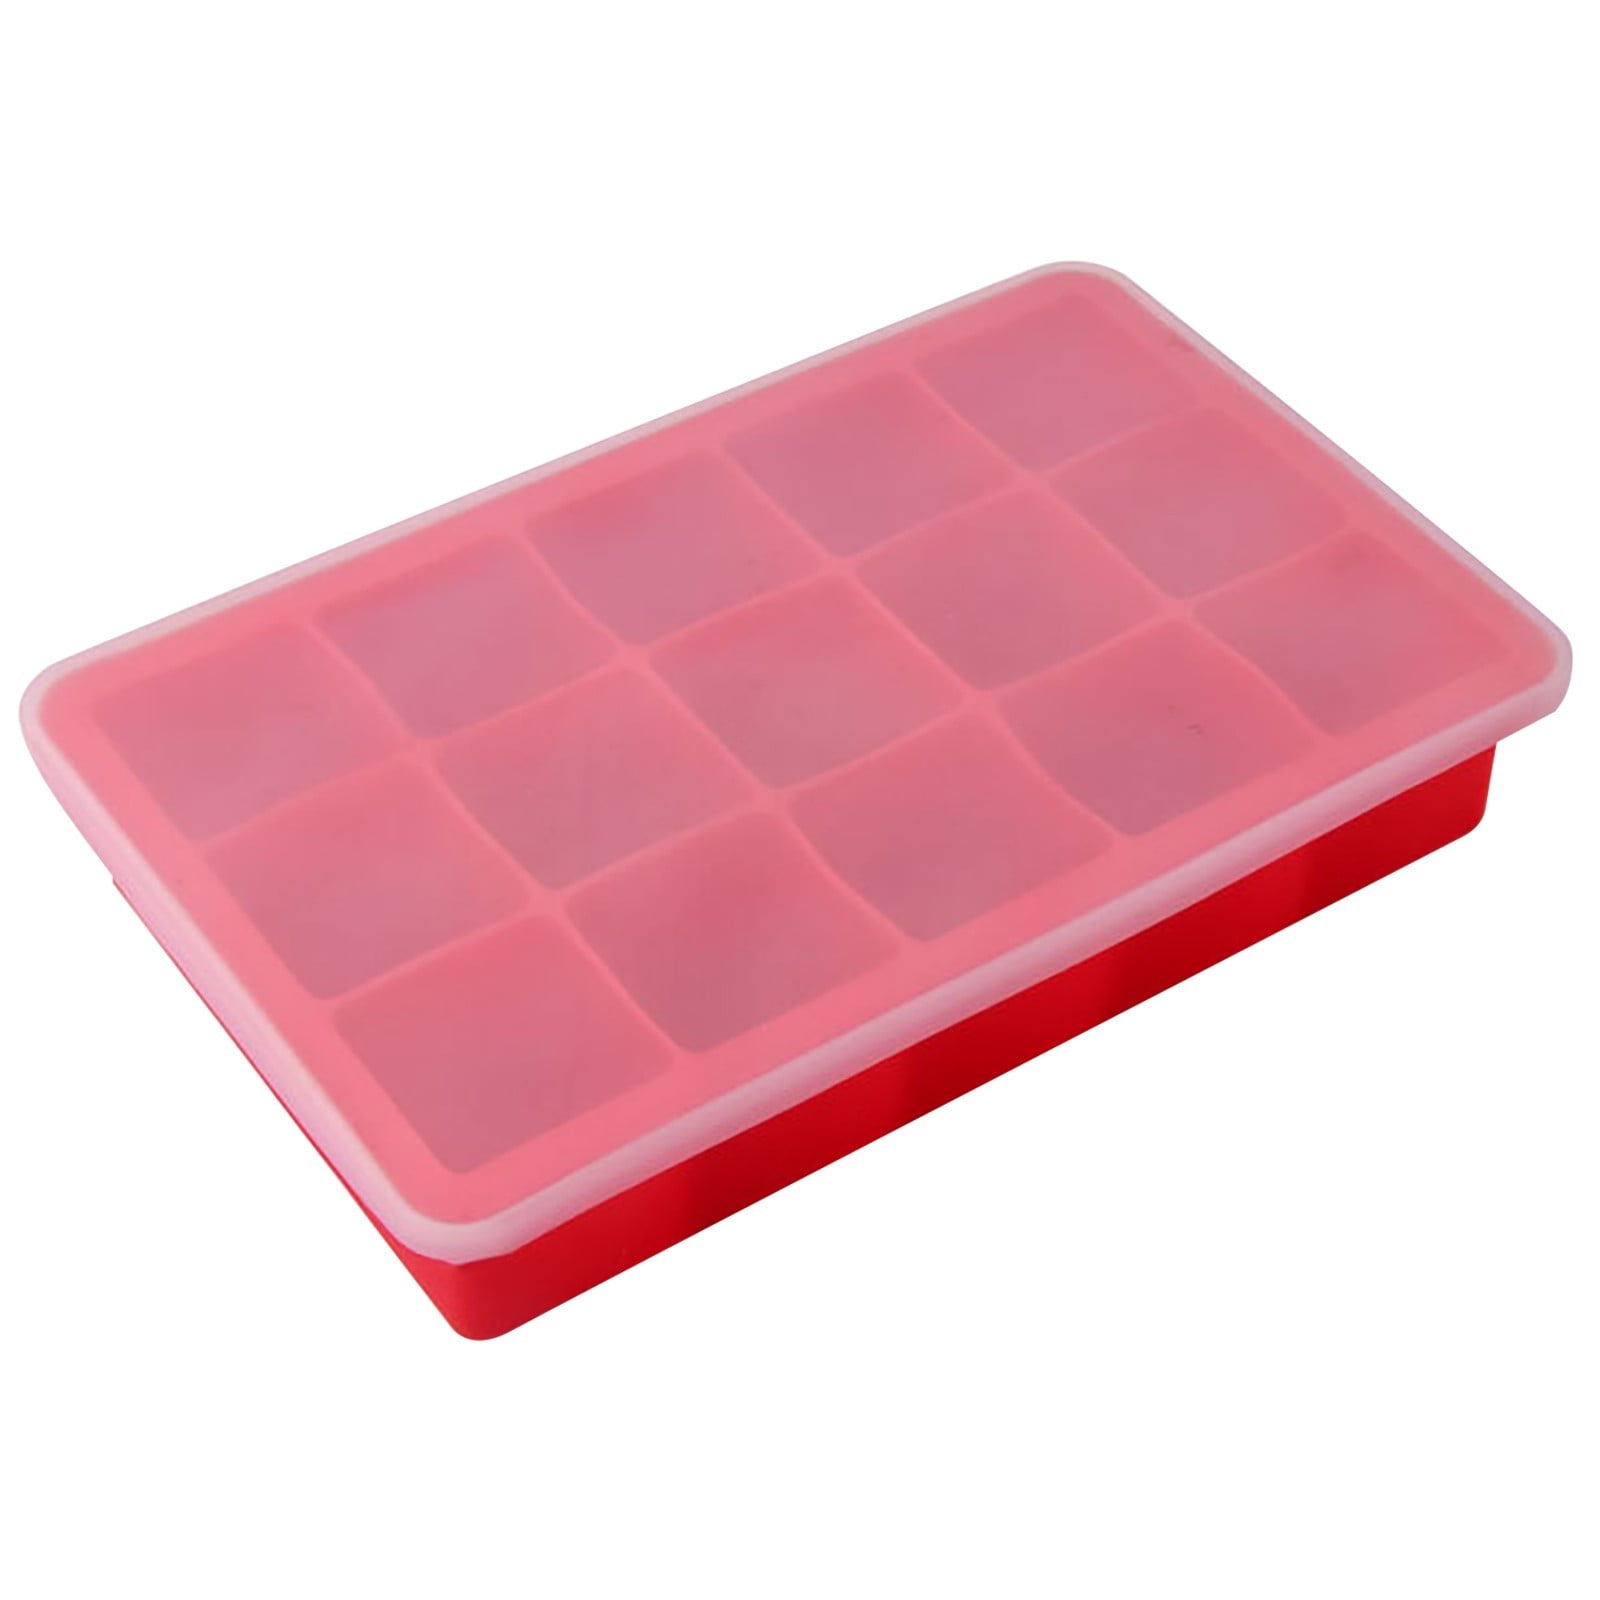 Zeceouar Make And Serve Ice Without Ever Touching The Ice - The Sanitary  Ice Tray for Freezer - NO Spills Silicone Tray With Lid - Ice Cube Maker 15